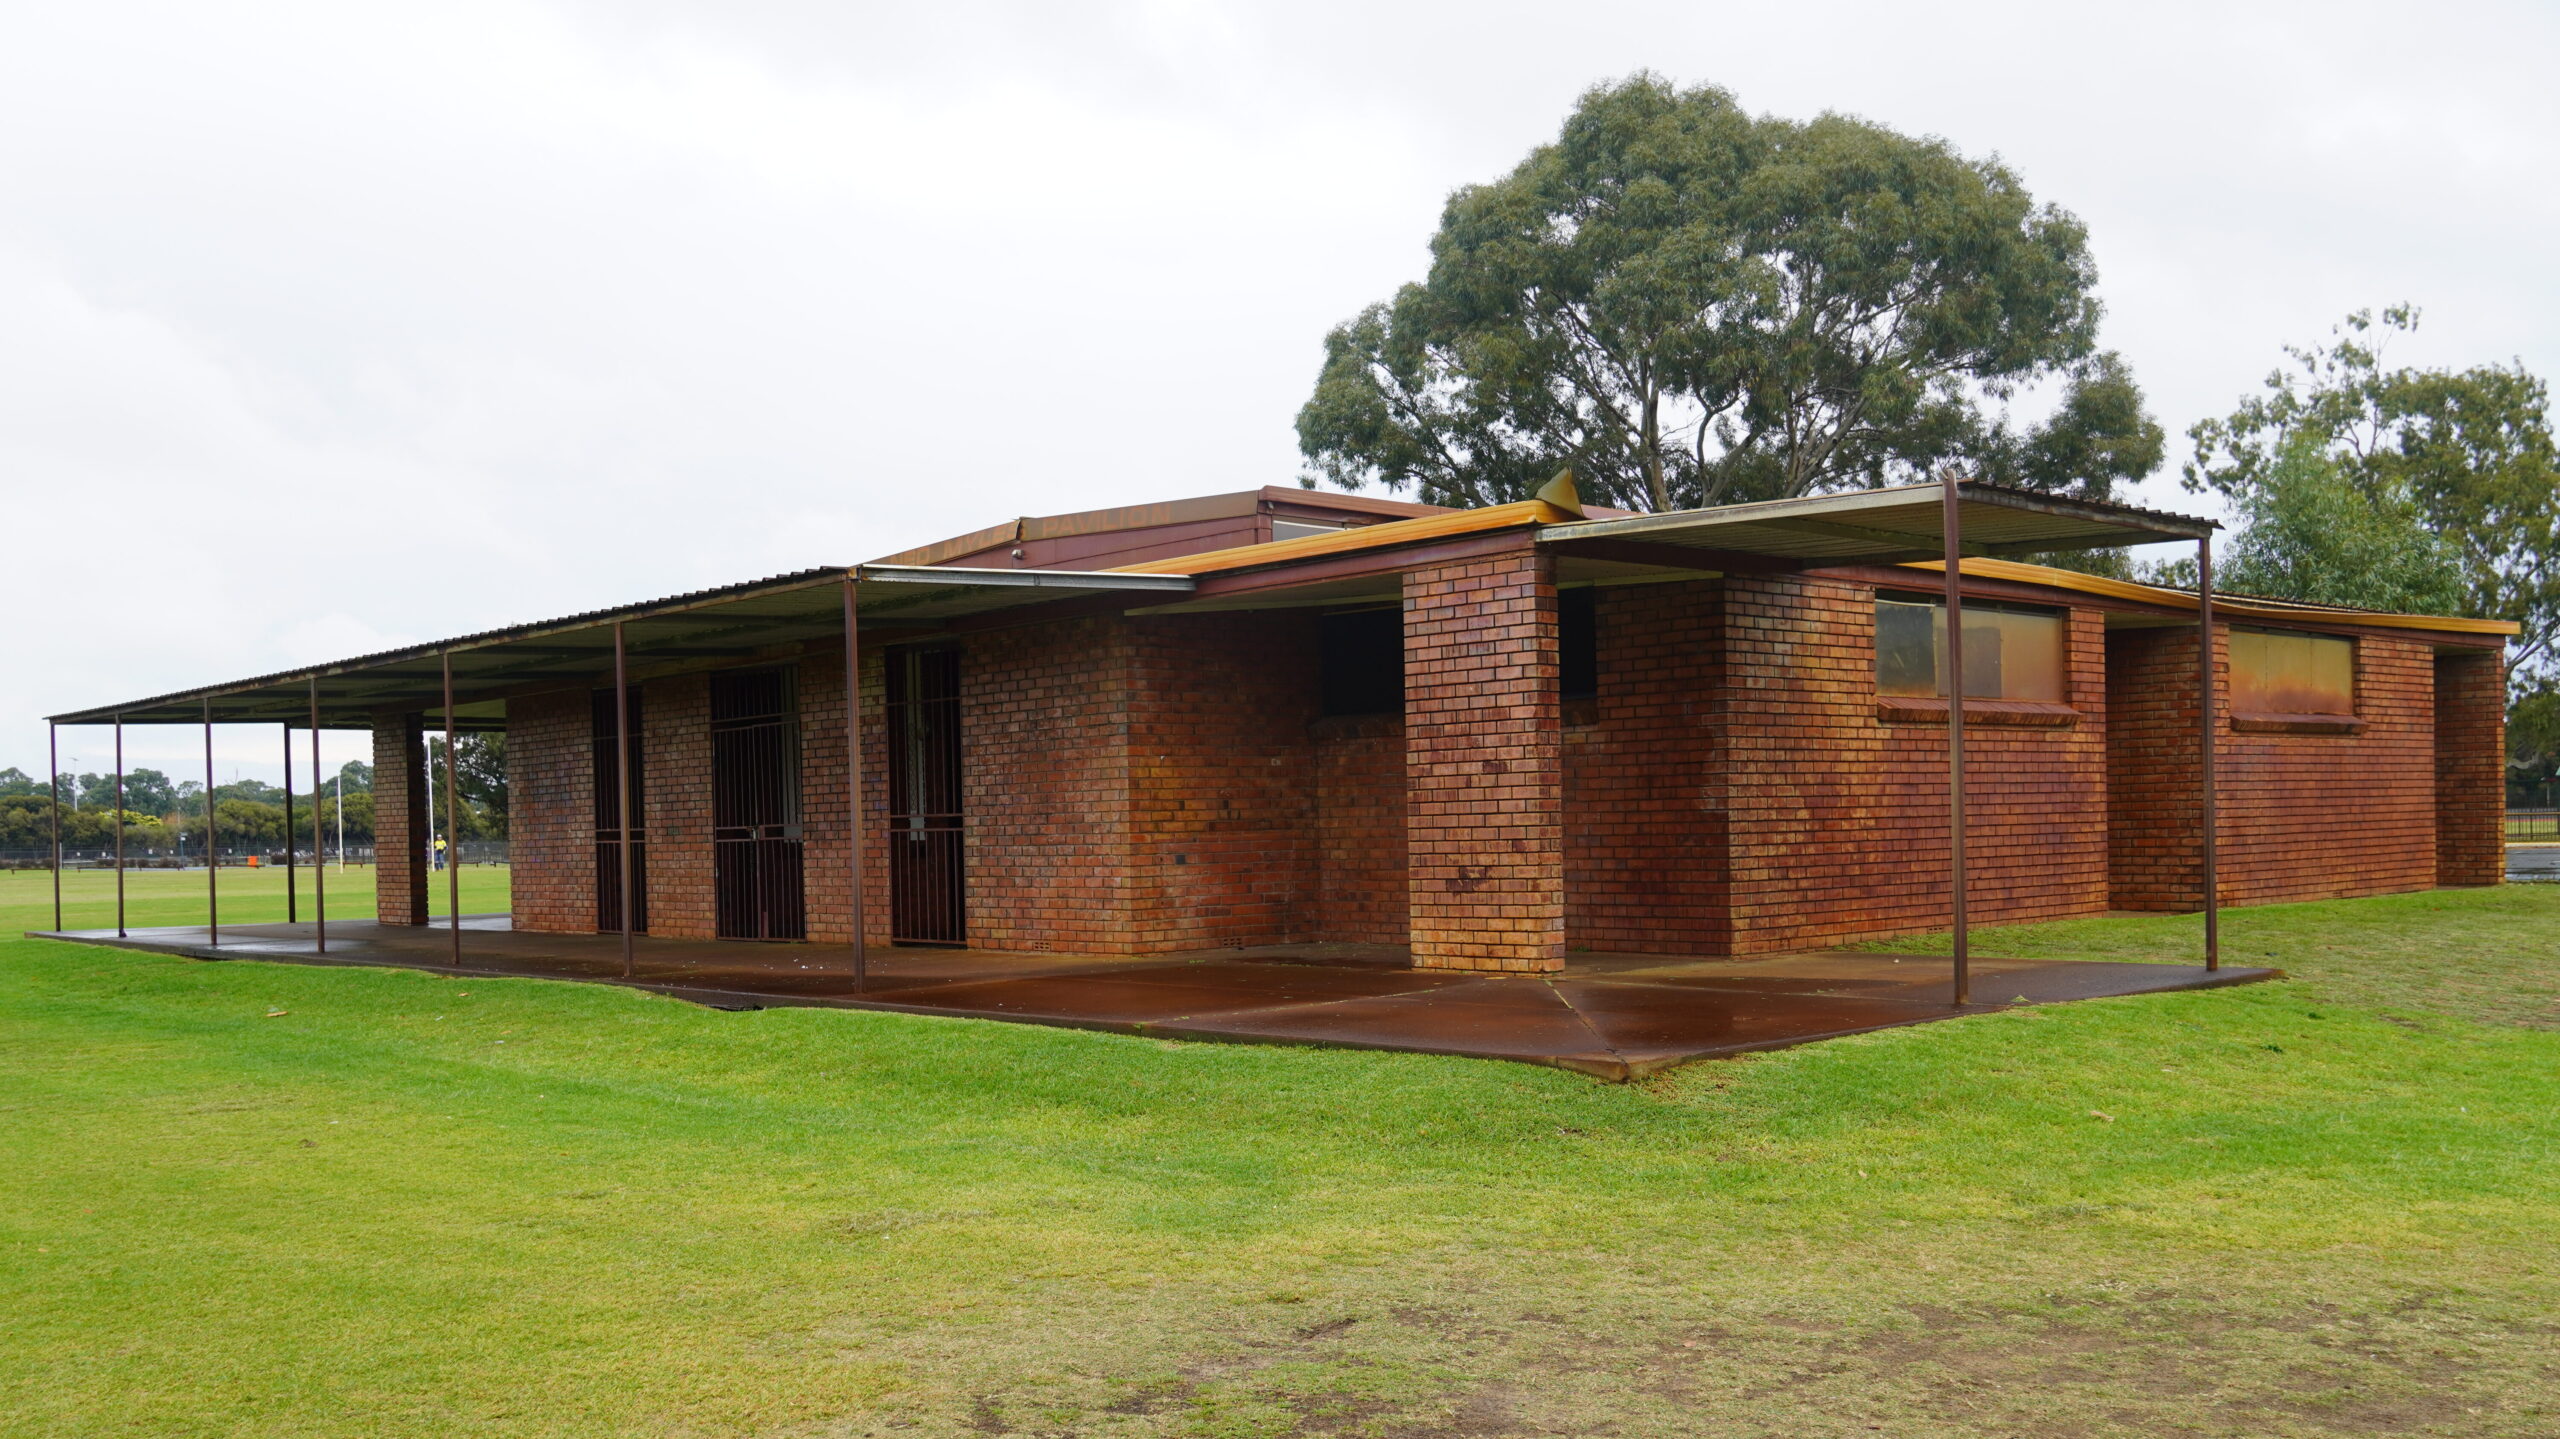 Brown brick building rusted roof and browned concrete patio located on green grass with a tree behind it